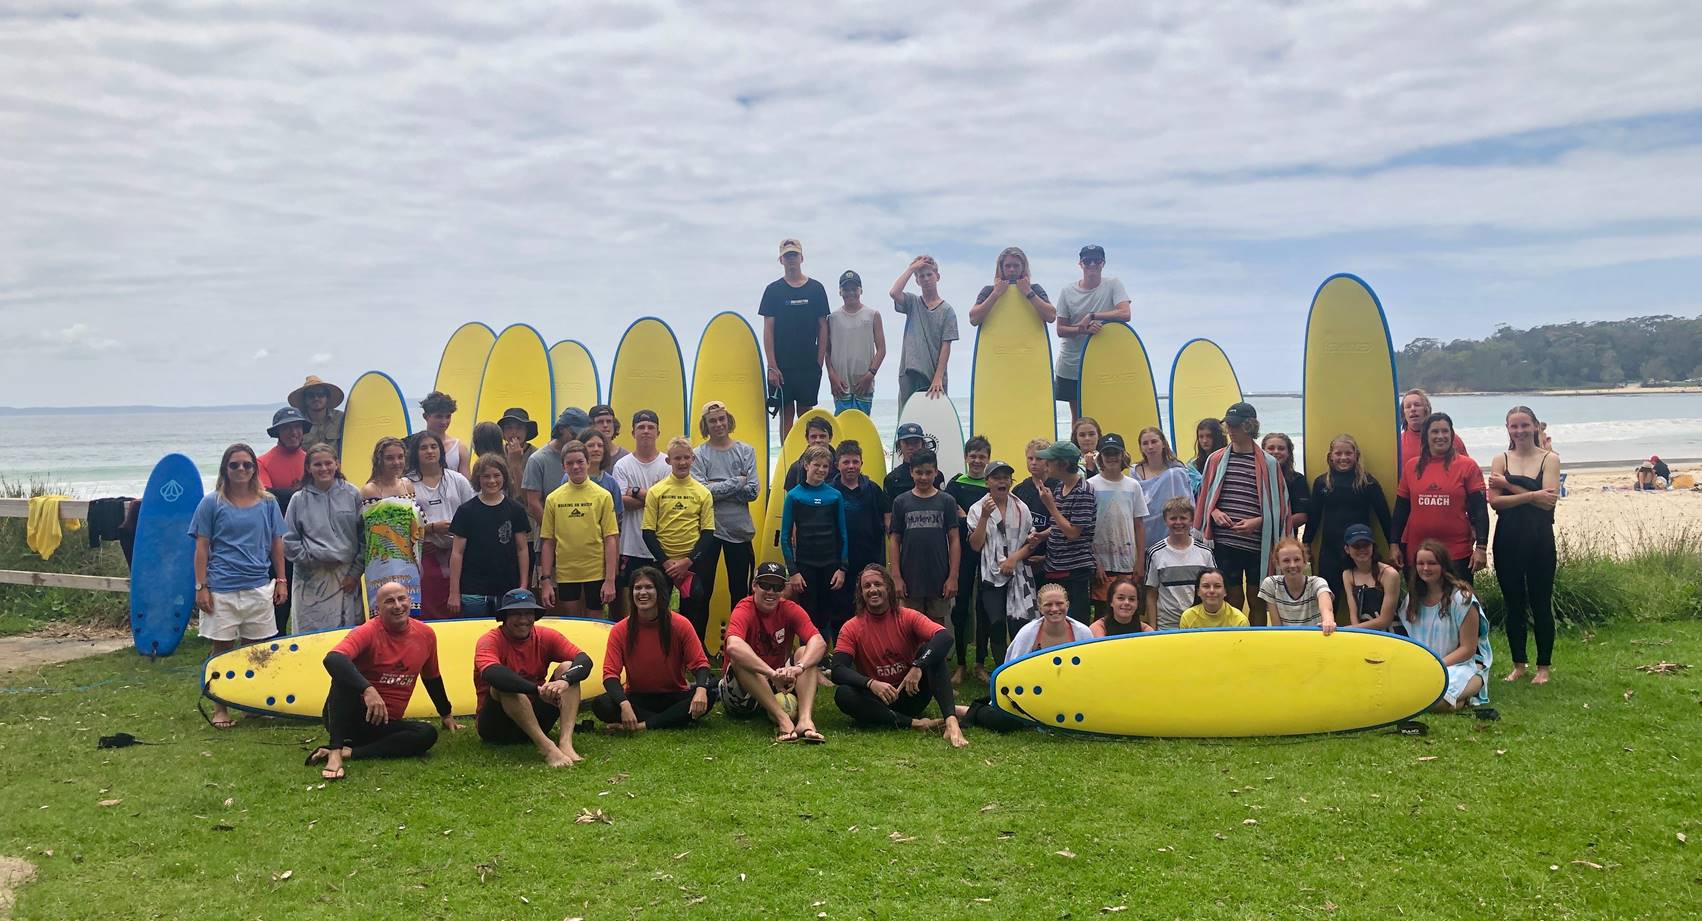 Large group of people with yellow coloured surf boards standing up and laying down on the grass with the ocean in the background